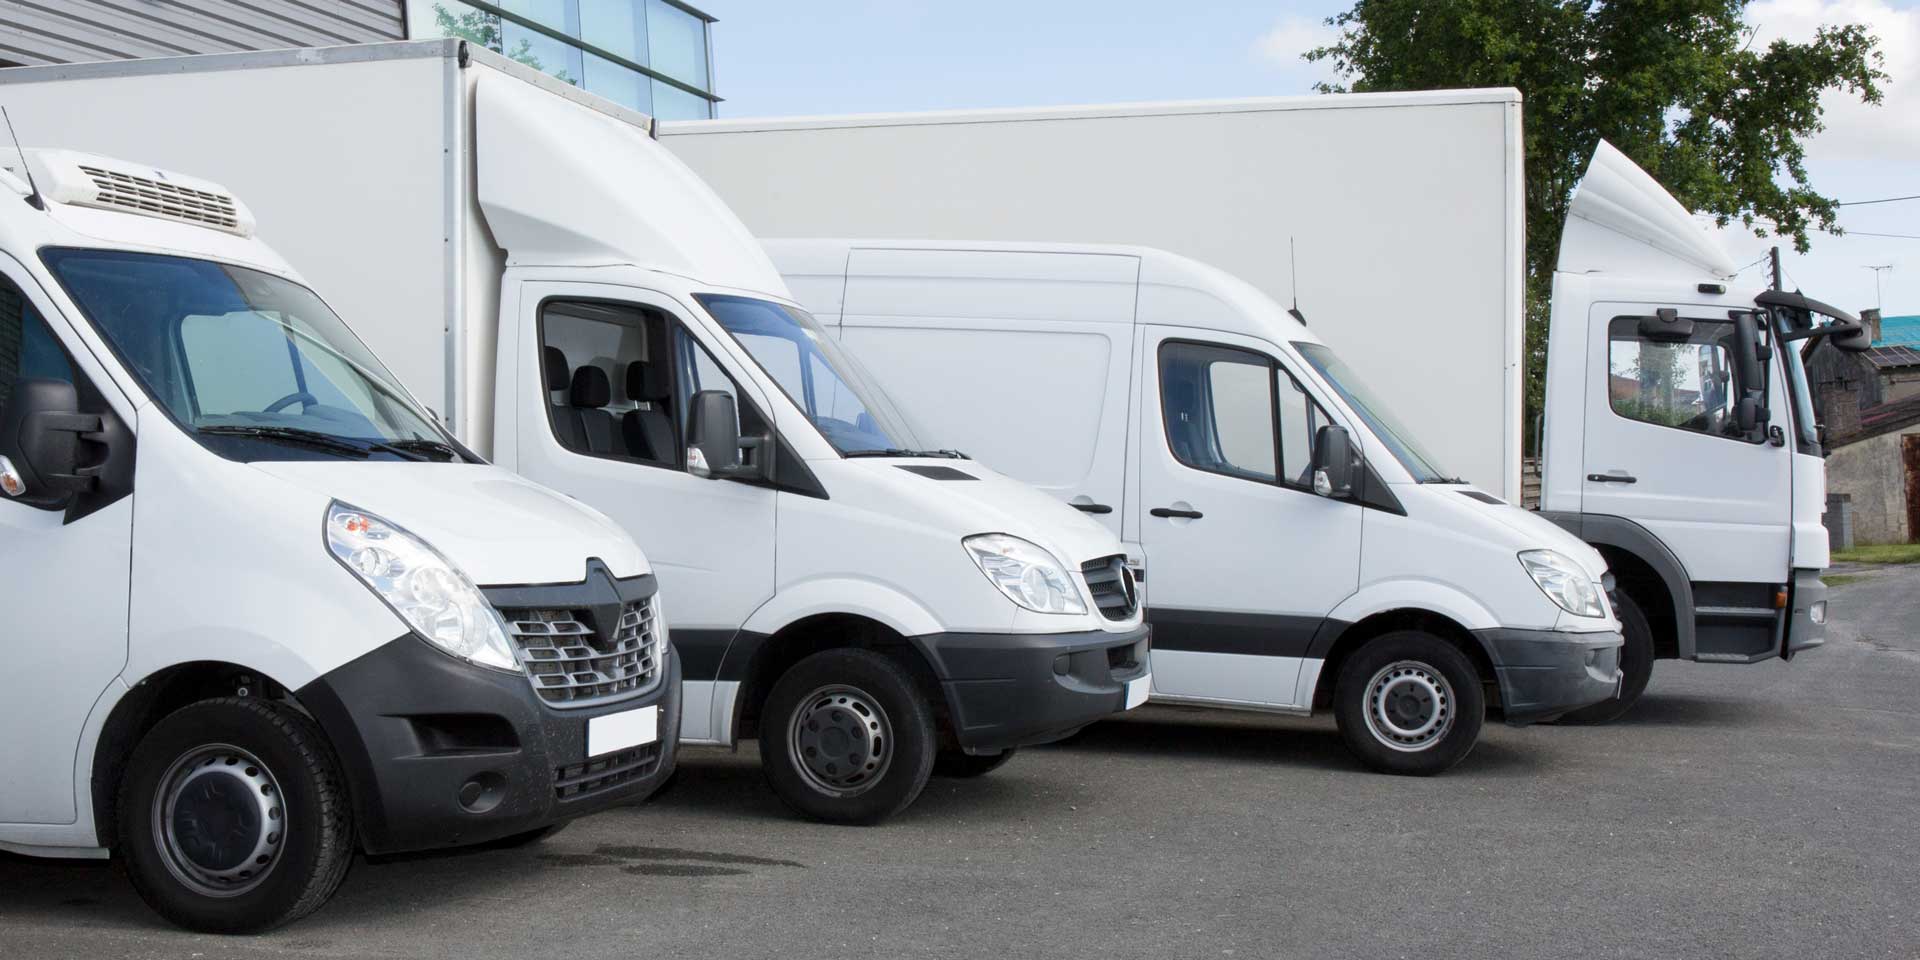 Searching for Commercial Fleet Truck Rental?